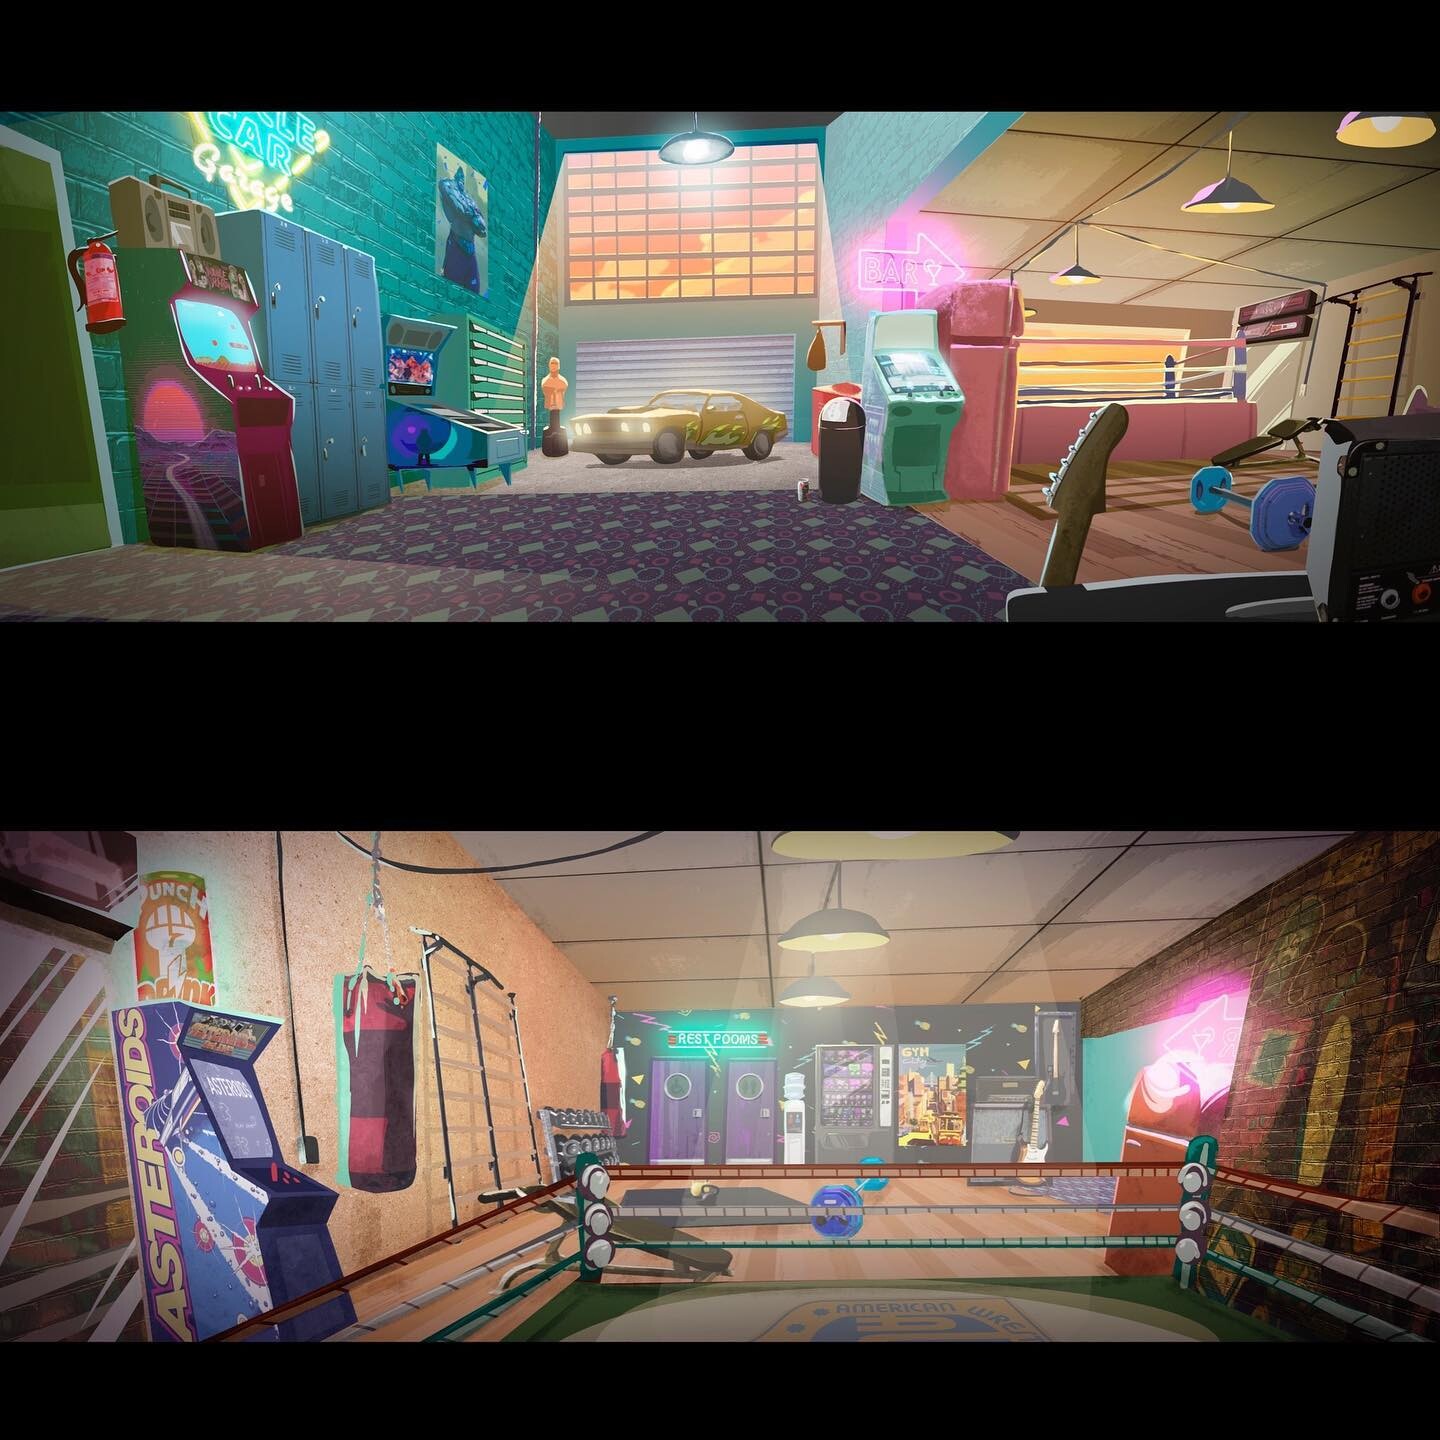 GYM MASTERS mood and background concepts